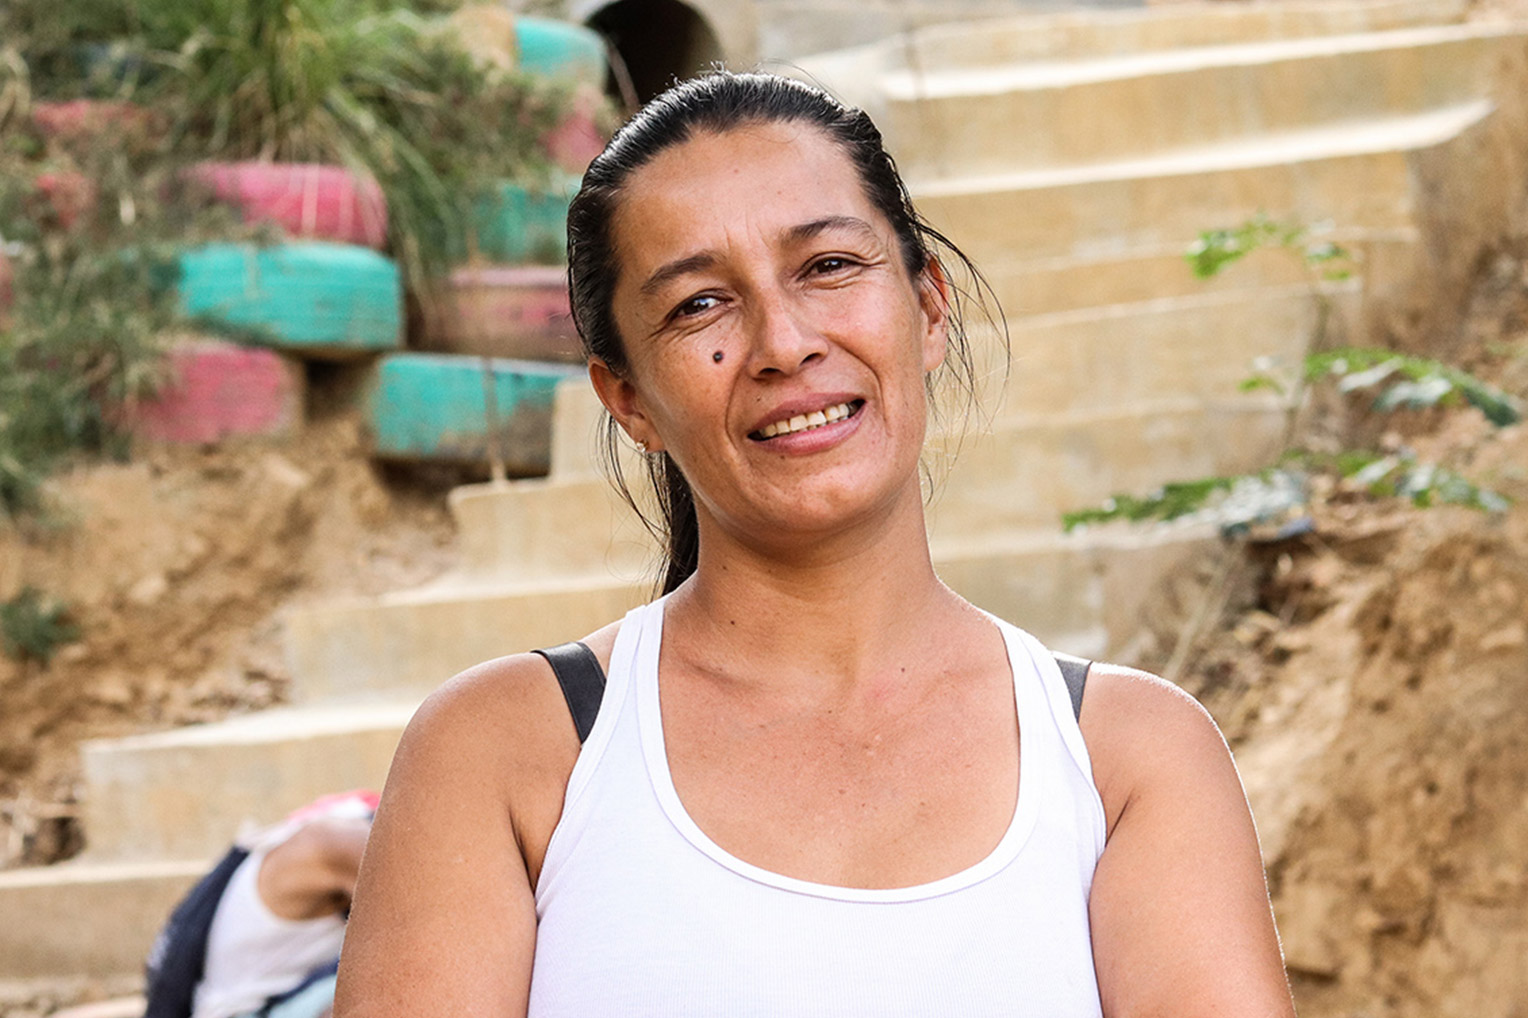 María Alejandra has championed development projects, such as a stair system of tires upgraded to concrete, as a result of attending Samaritan’s Purse community leadership classes.